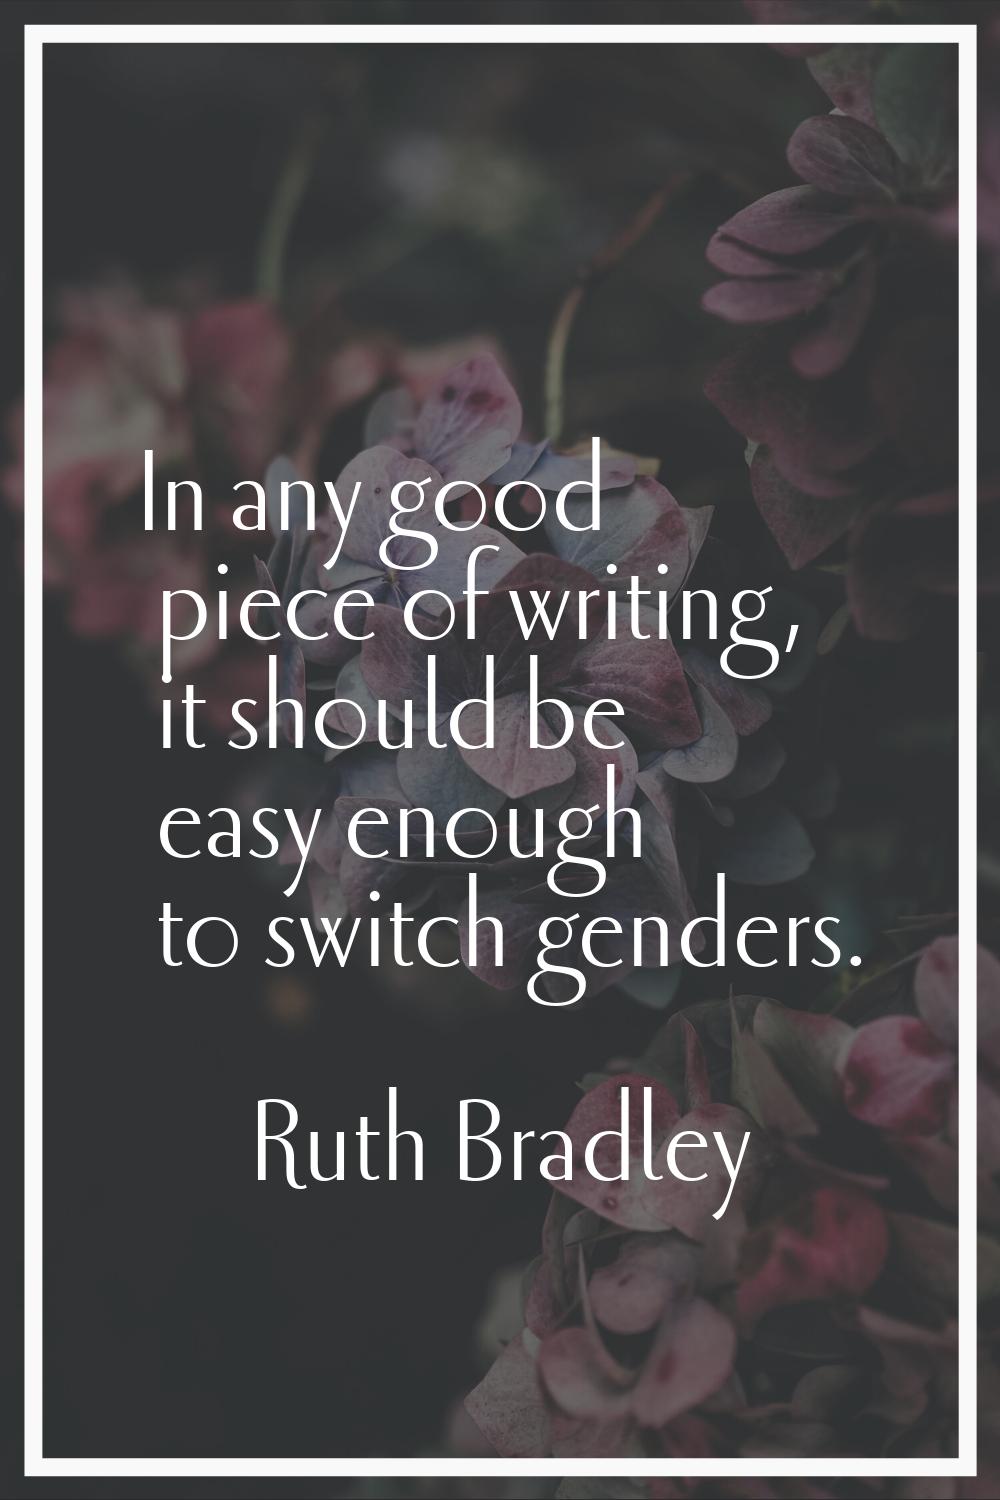 In any good piece of writing, it should be easy enough to switch genders.